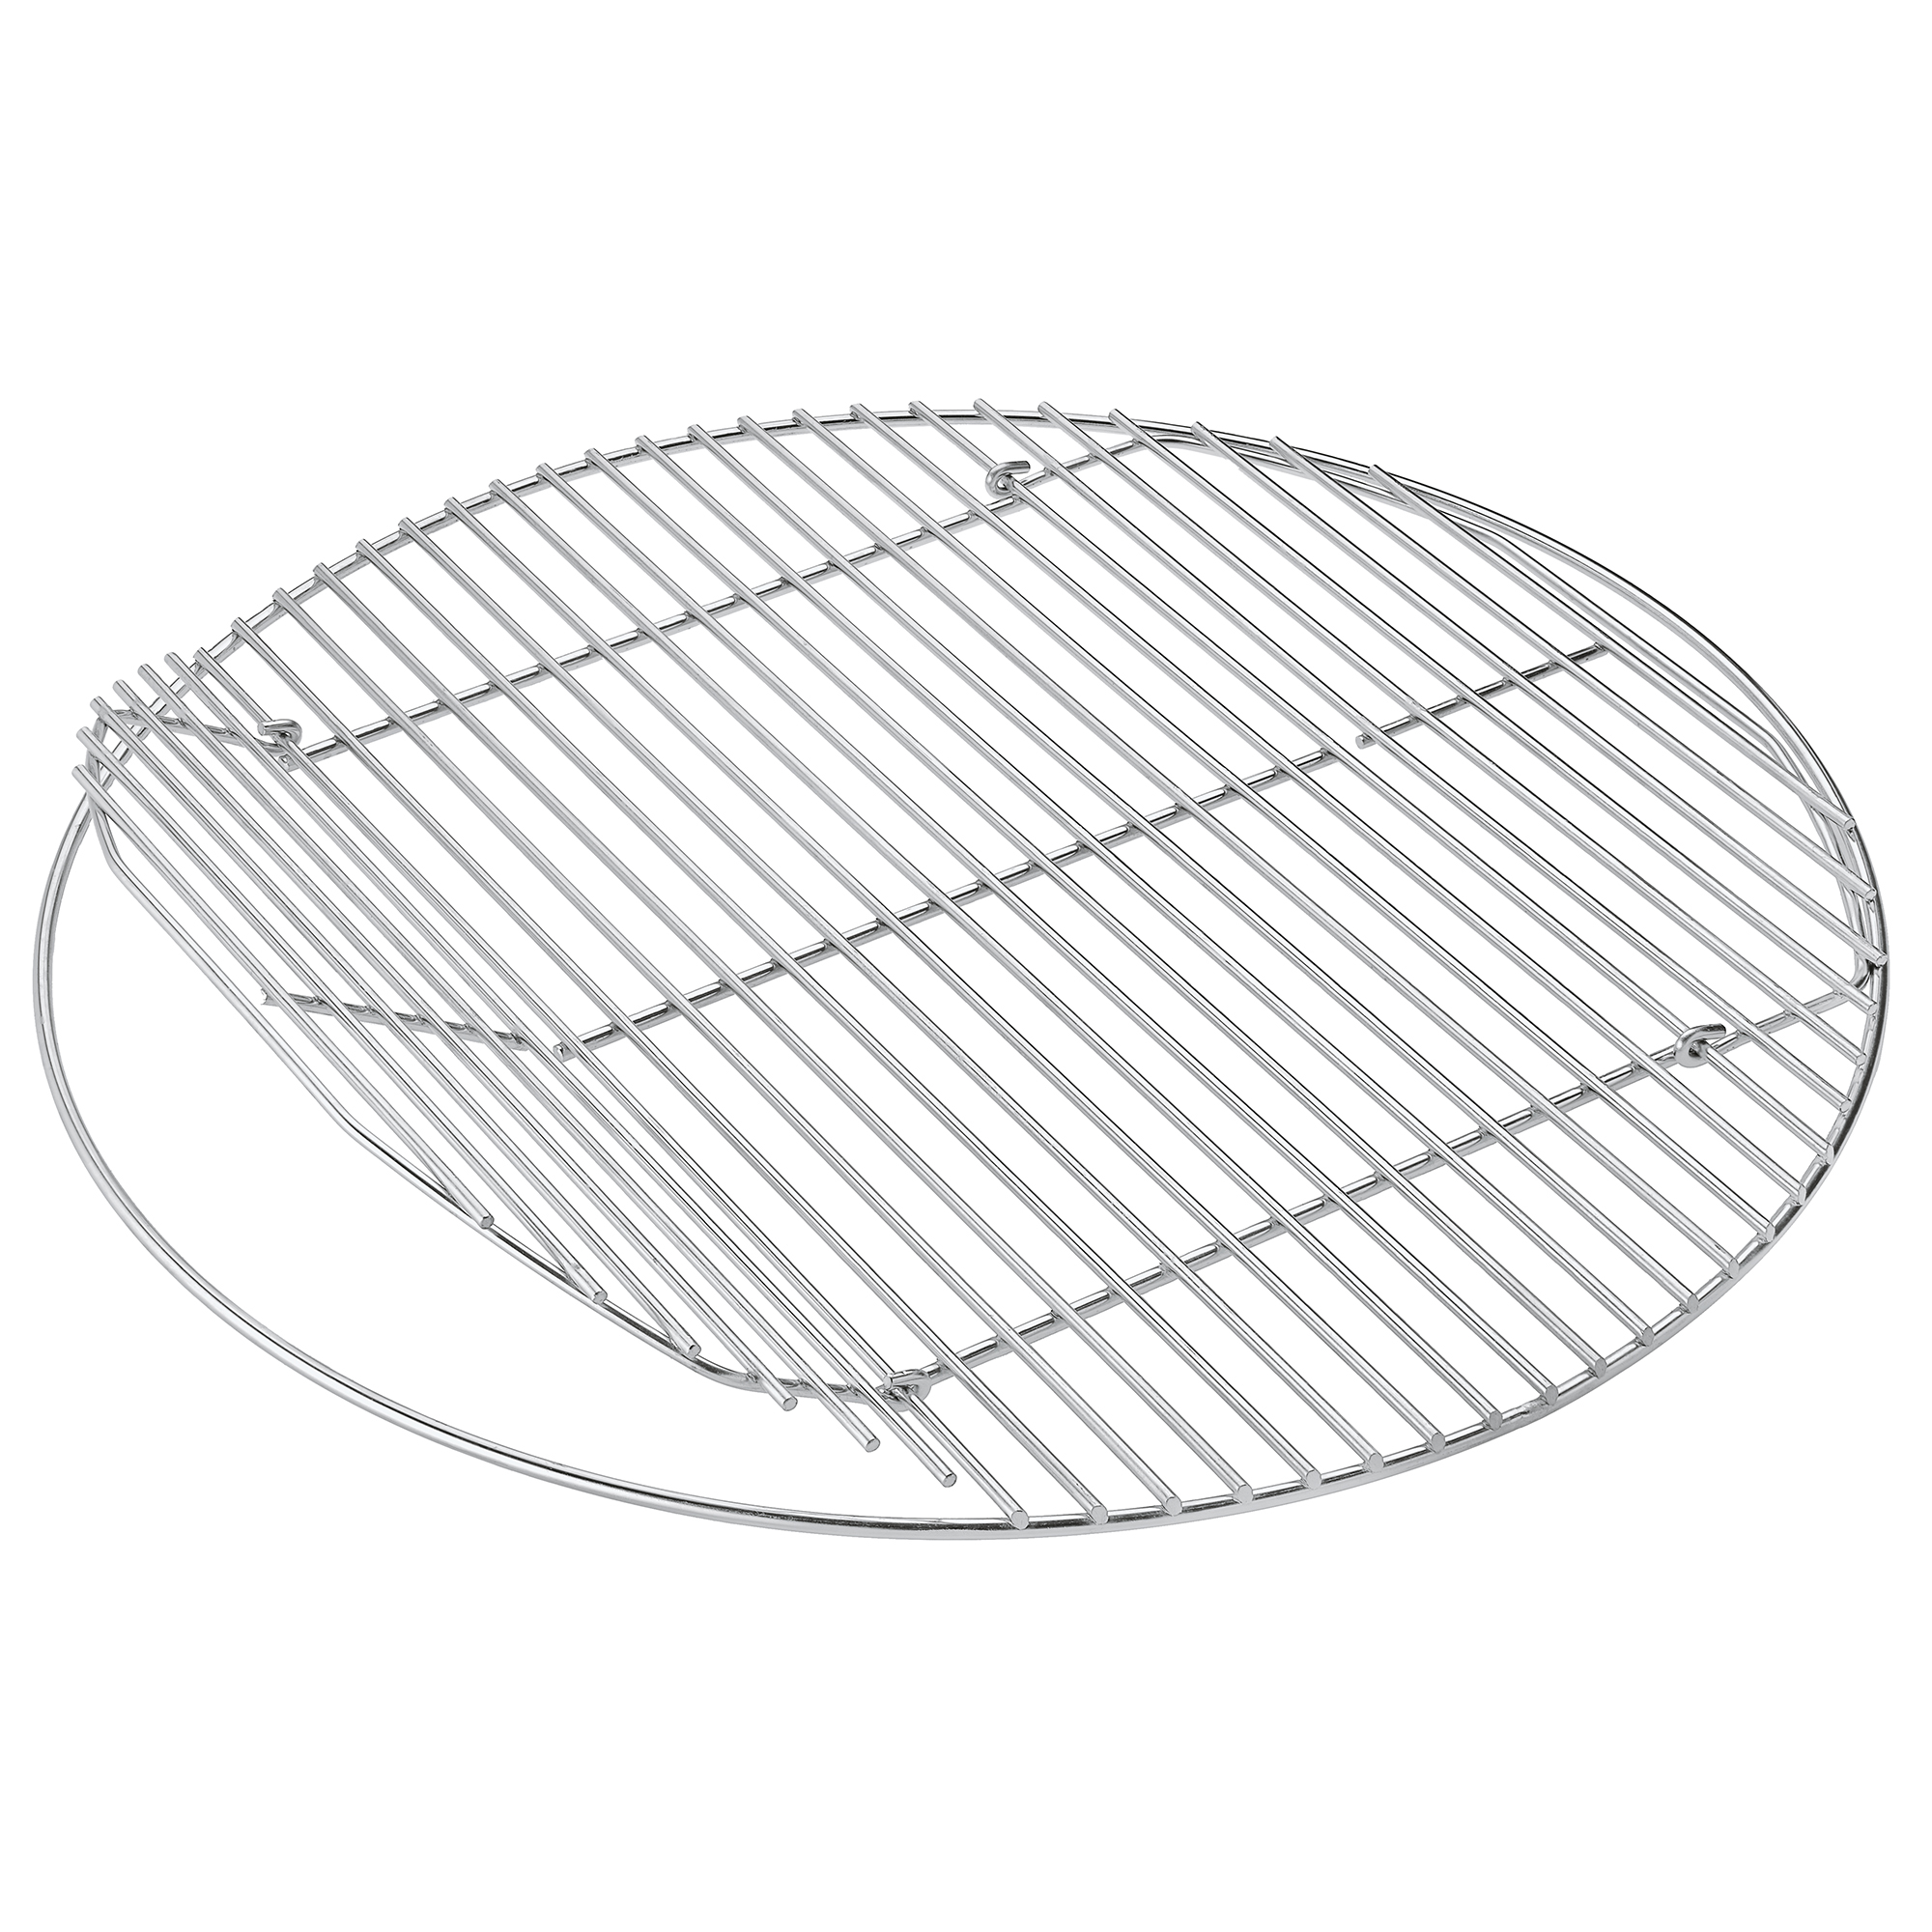 Stainless Steel Grilling Grate (sport F60)